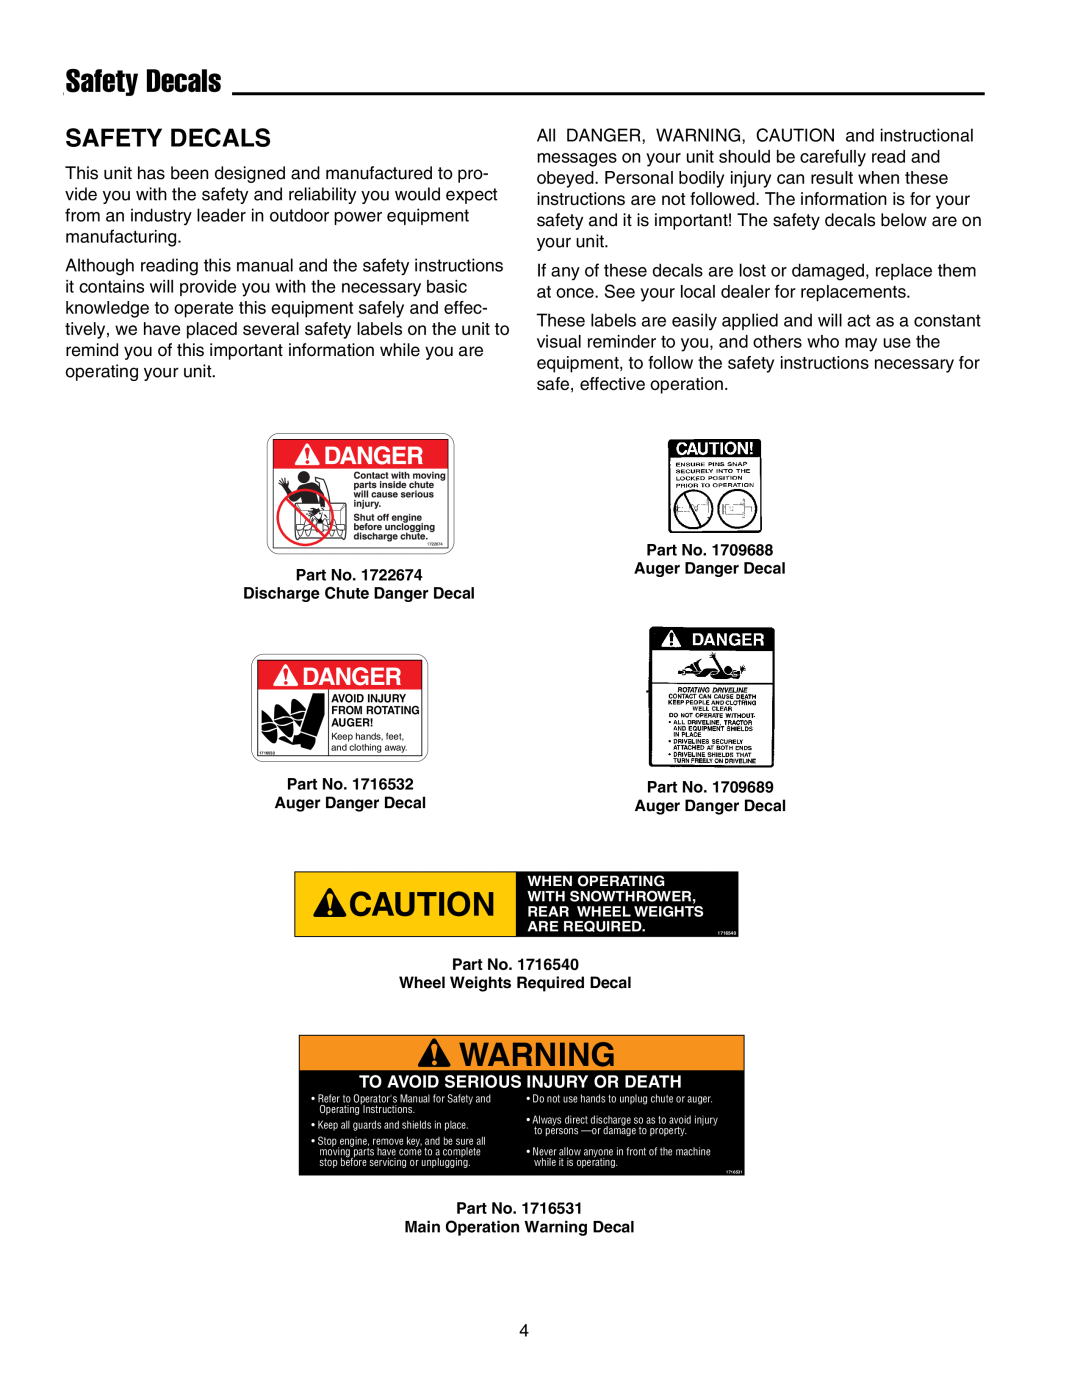 Massey Ferguson L&G 1694404 manual Safety Decals, Danger, To Avoid Serious Injury Or Death 